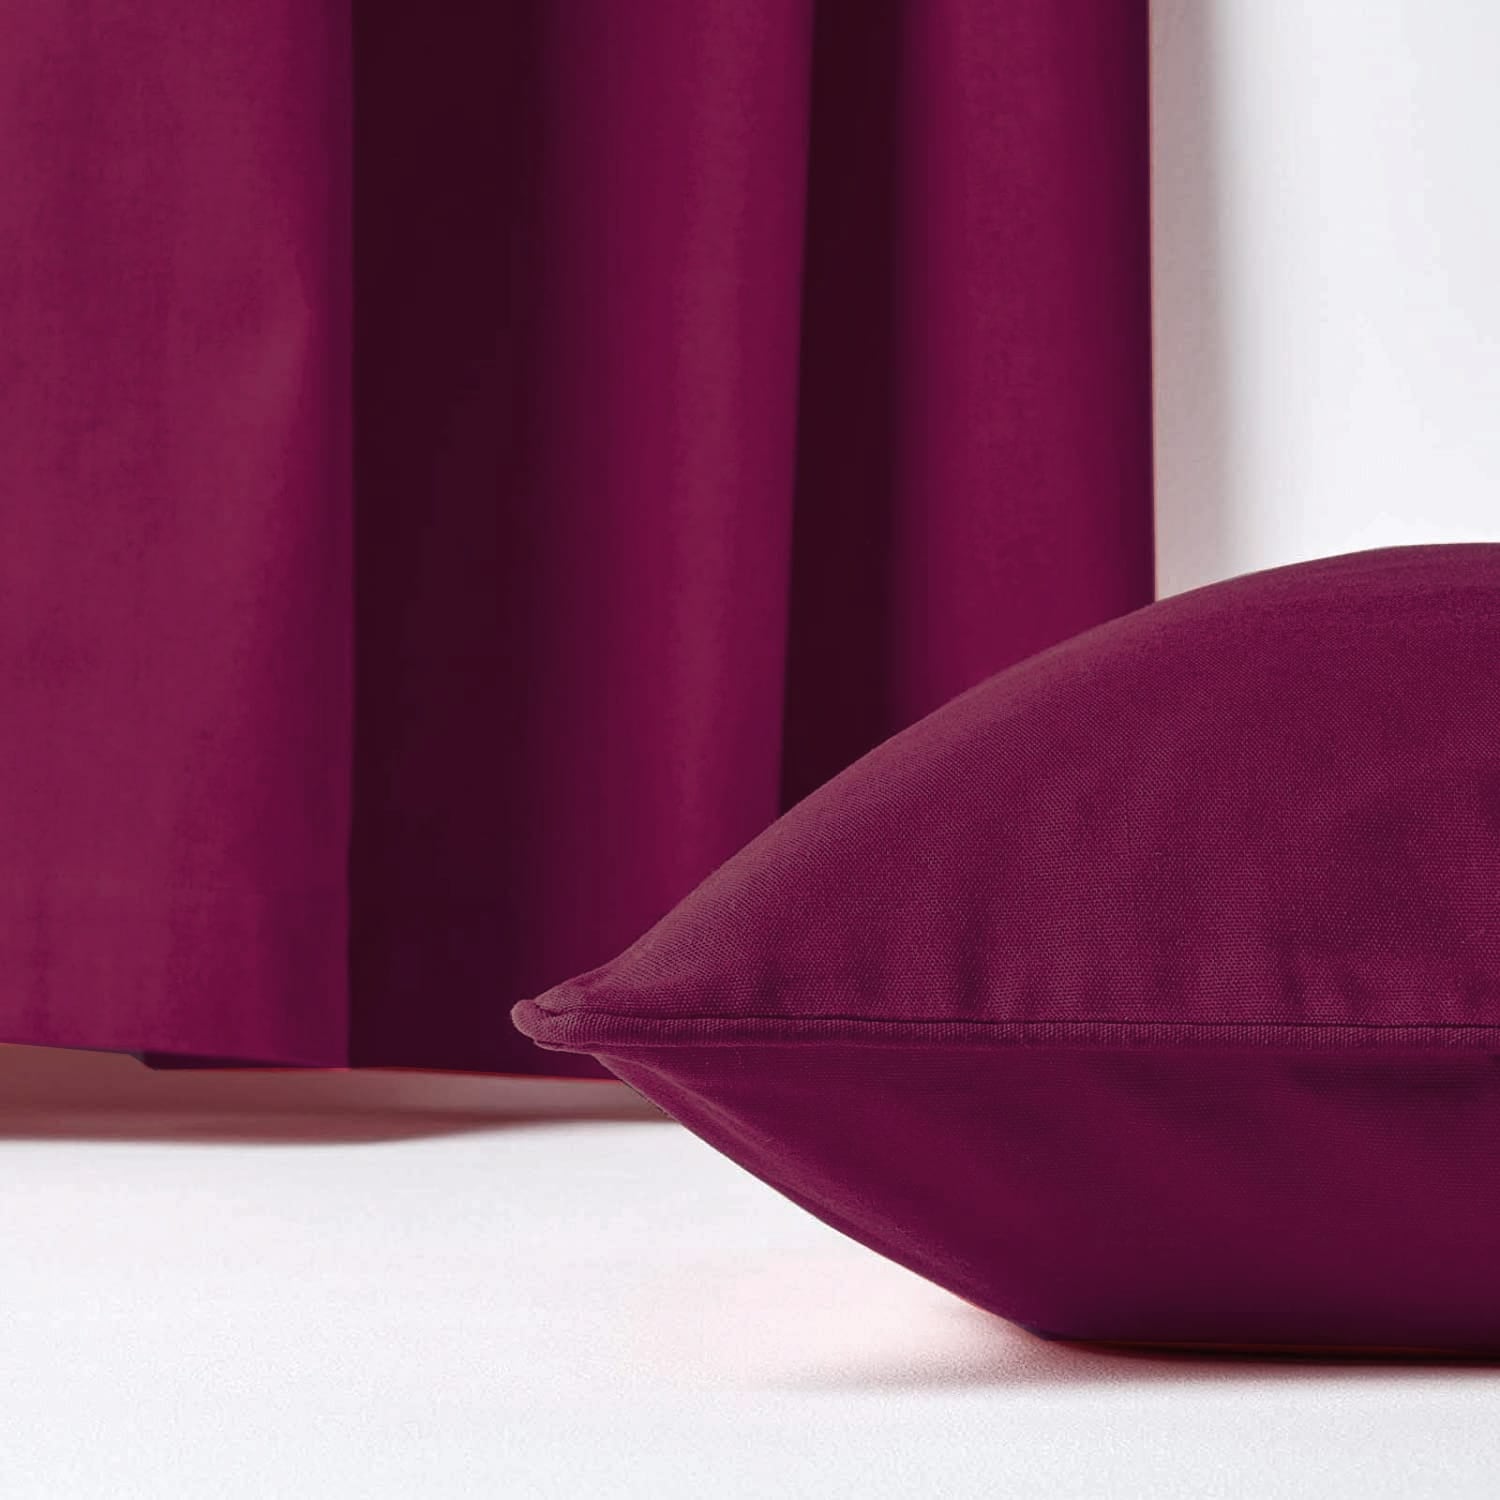 Plain Cotton Decorative Cushion Cover in Burgundy online at best prices